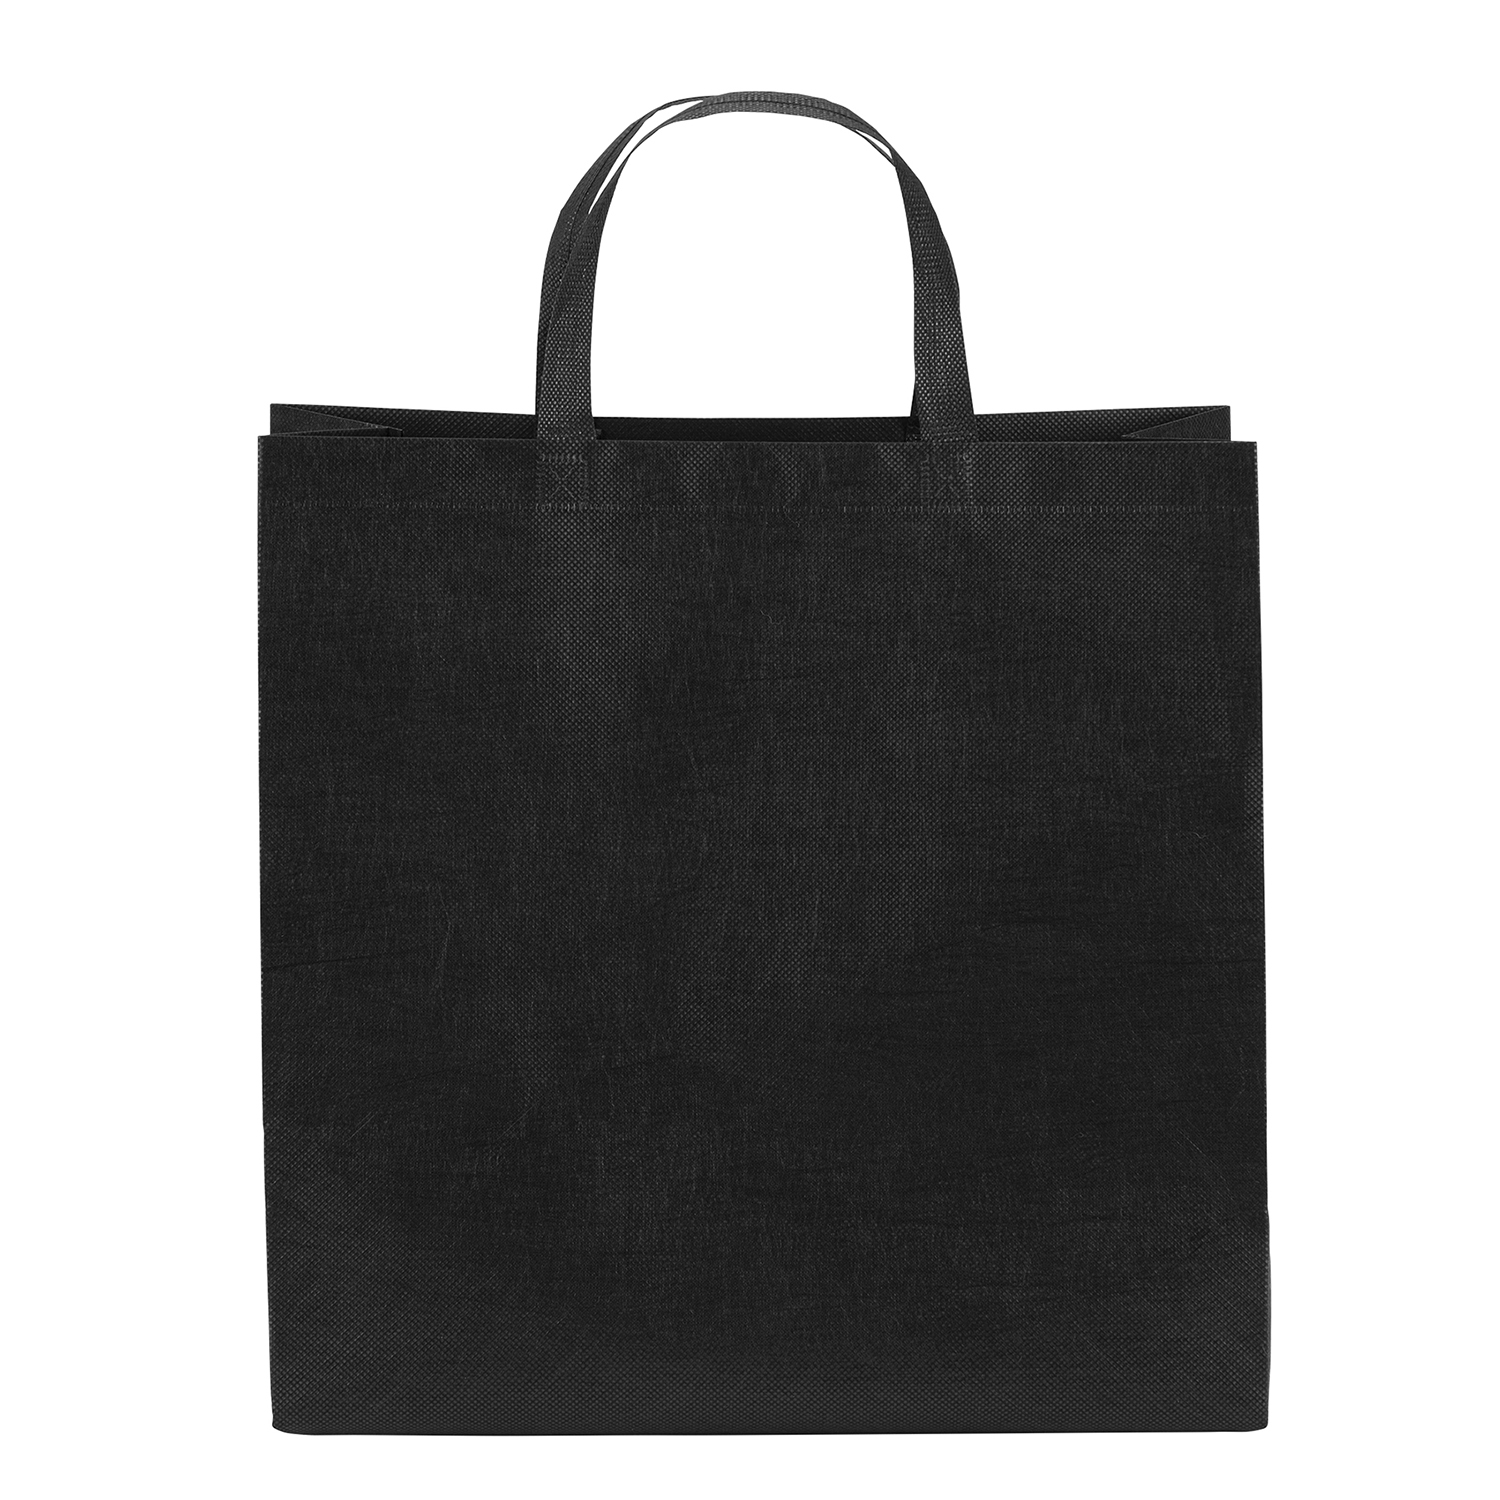 Bag Makers 40OC1515 - Custom Printed Eco-Friendly Promotional Non-Woven Grocery Tote Bag